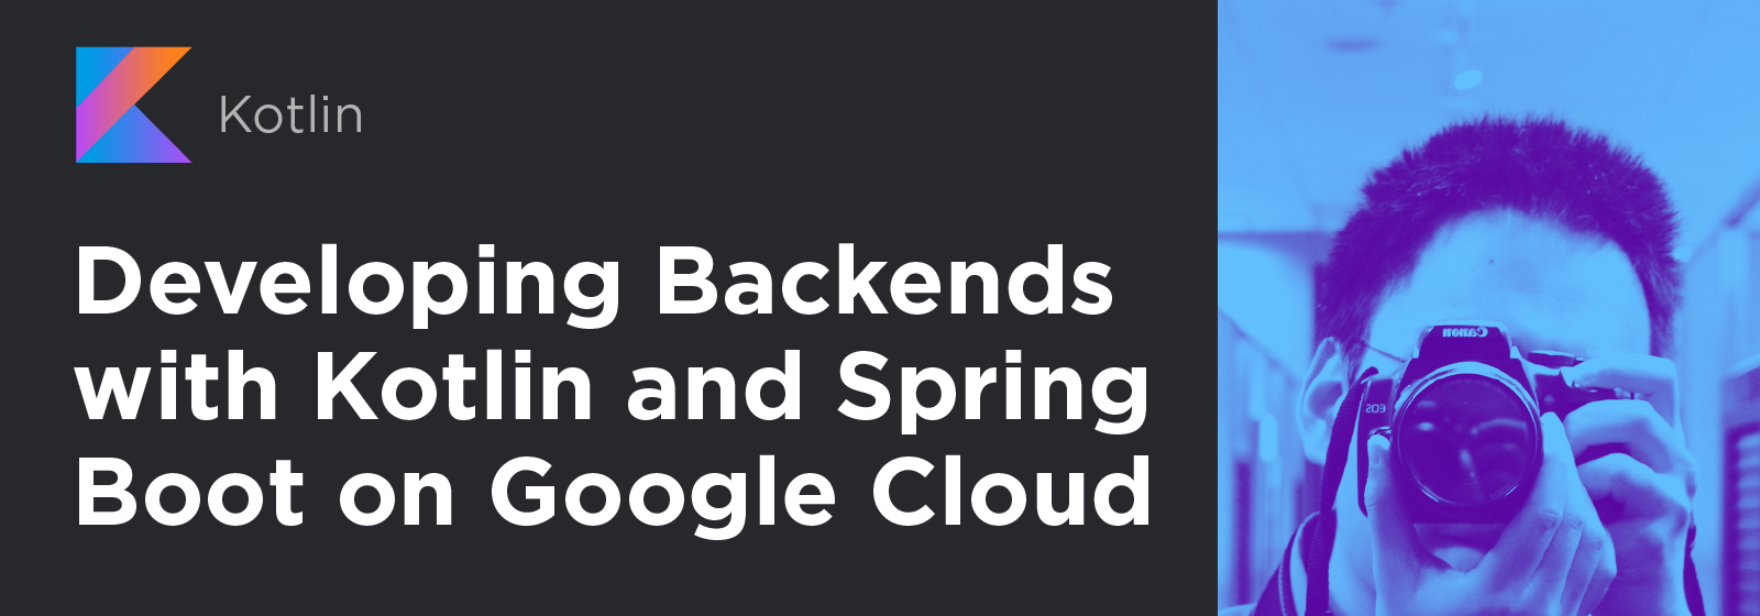 Вебинар Developing Backends with Kotlin and Spring Boot on Google Cloud